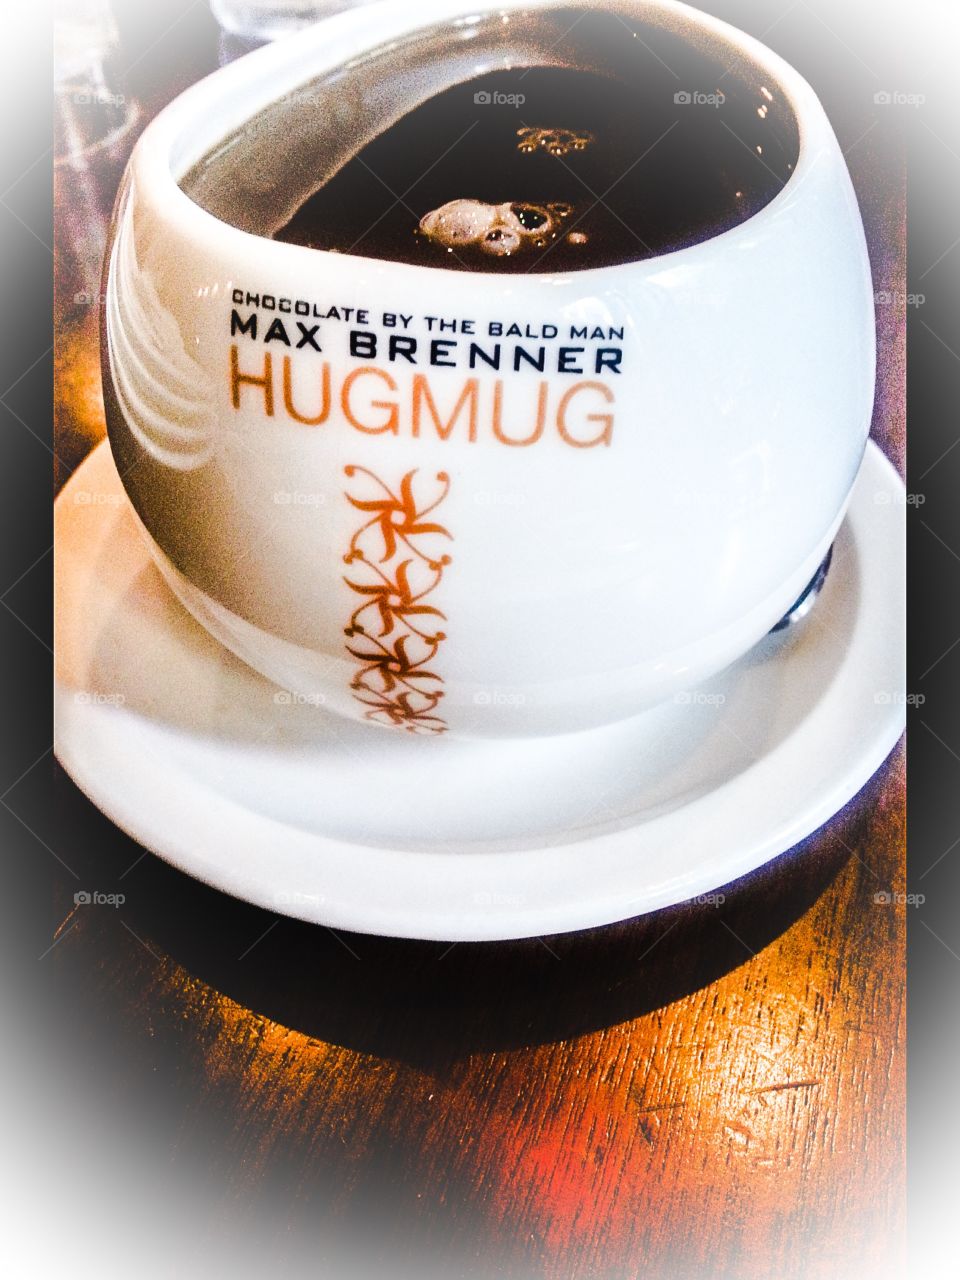 Hot cocoa. While at Max Brenner's